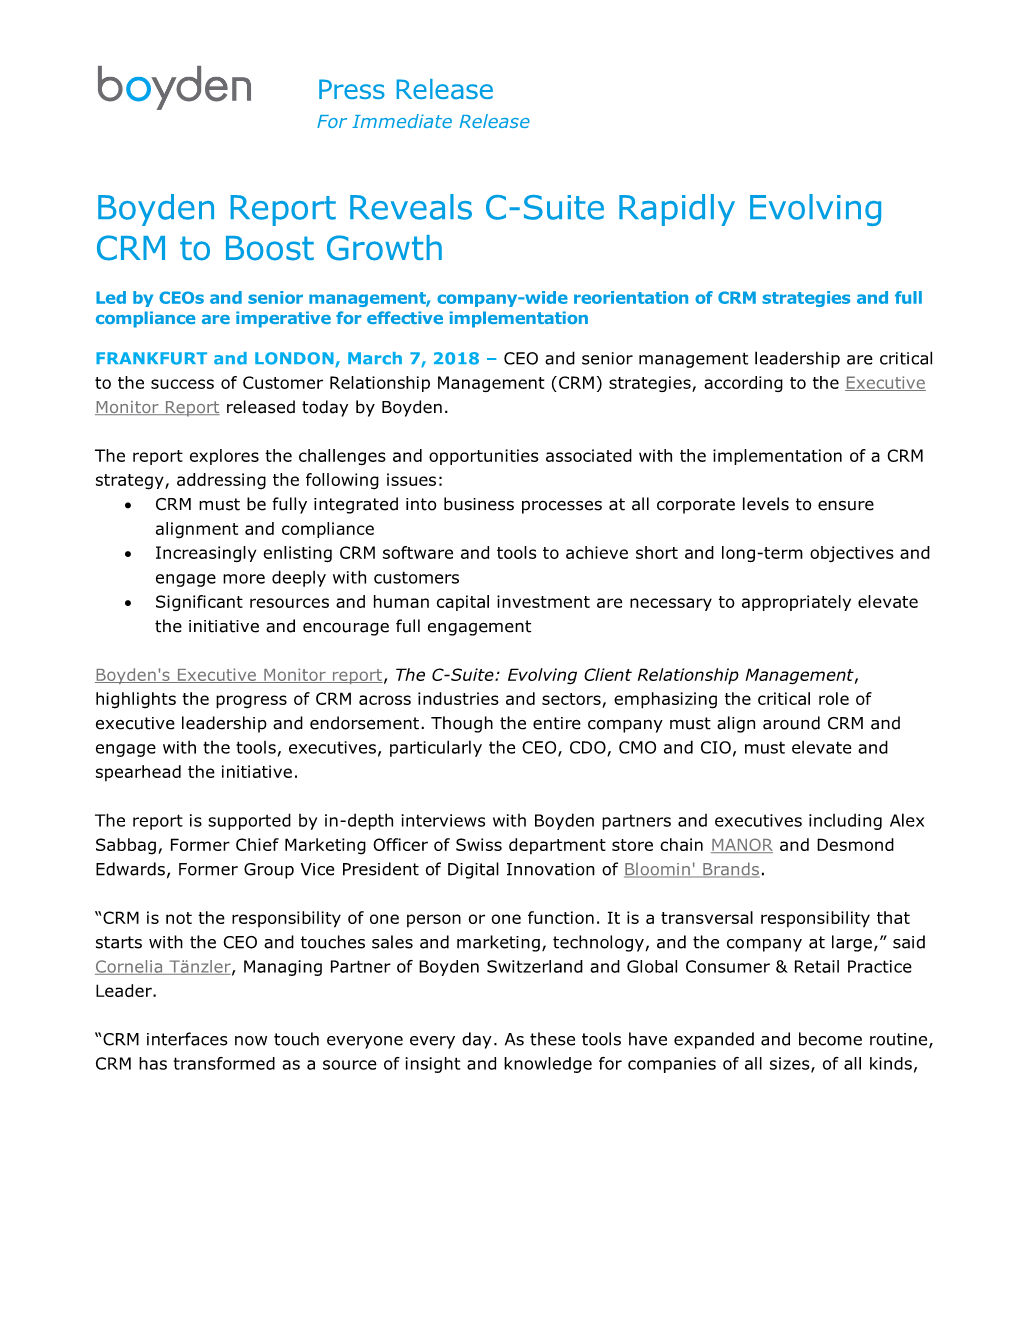 Boyden Report Reveals C-Suite Rapidly Evolving CRM to Boost Growth